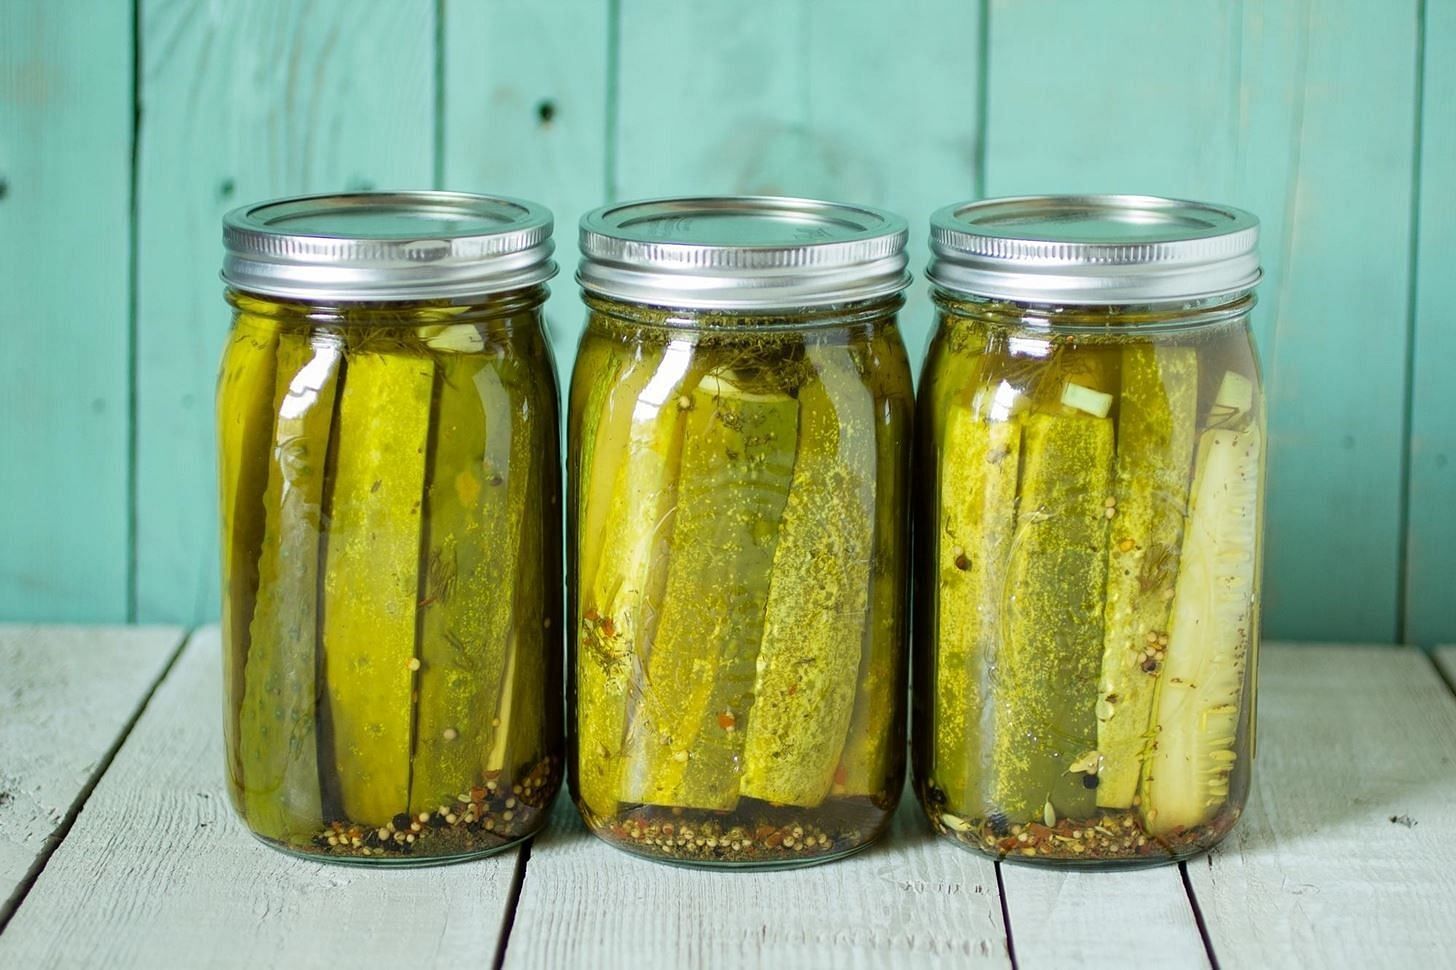 Pickle juice (Image is Getty Images)